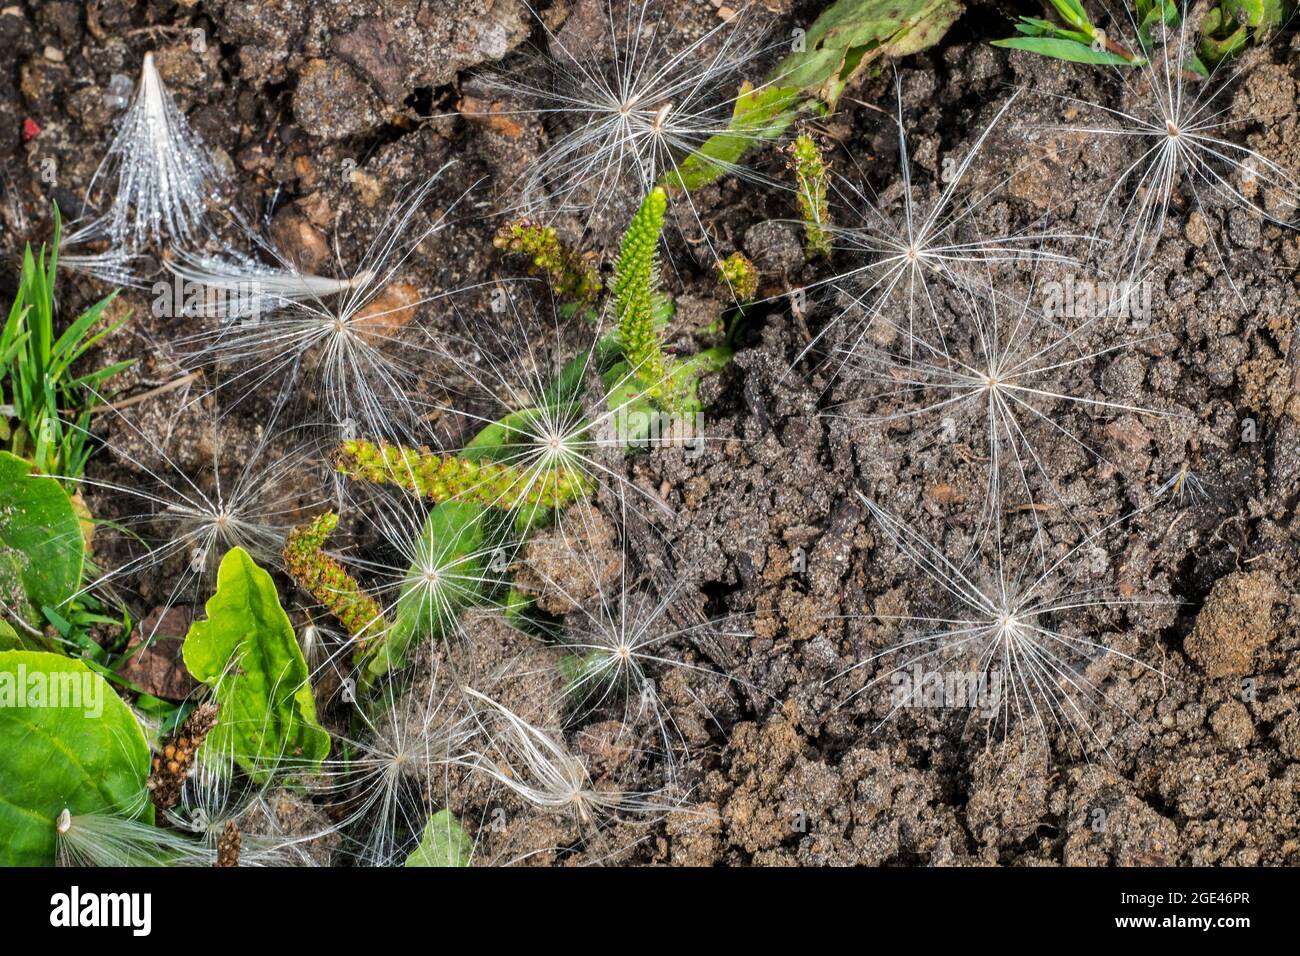 Fallen seeds on the ground from spear thistle / bull thistle / common thistle (Cirsium vulgare / Cirsium lanceolatum) in summer Stock Photo